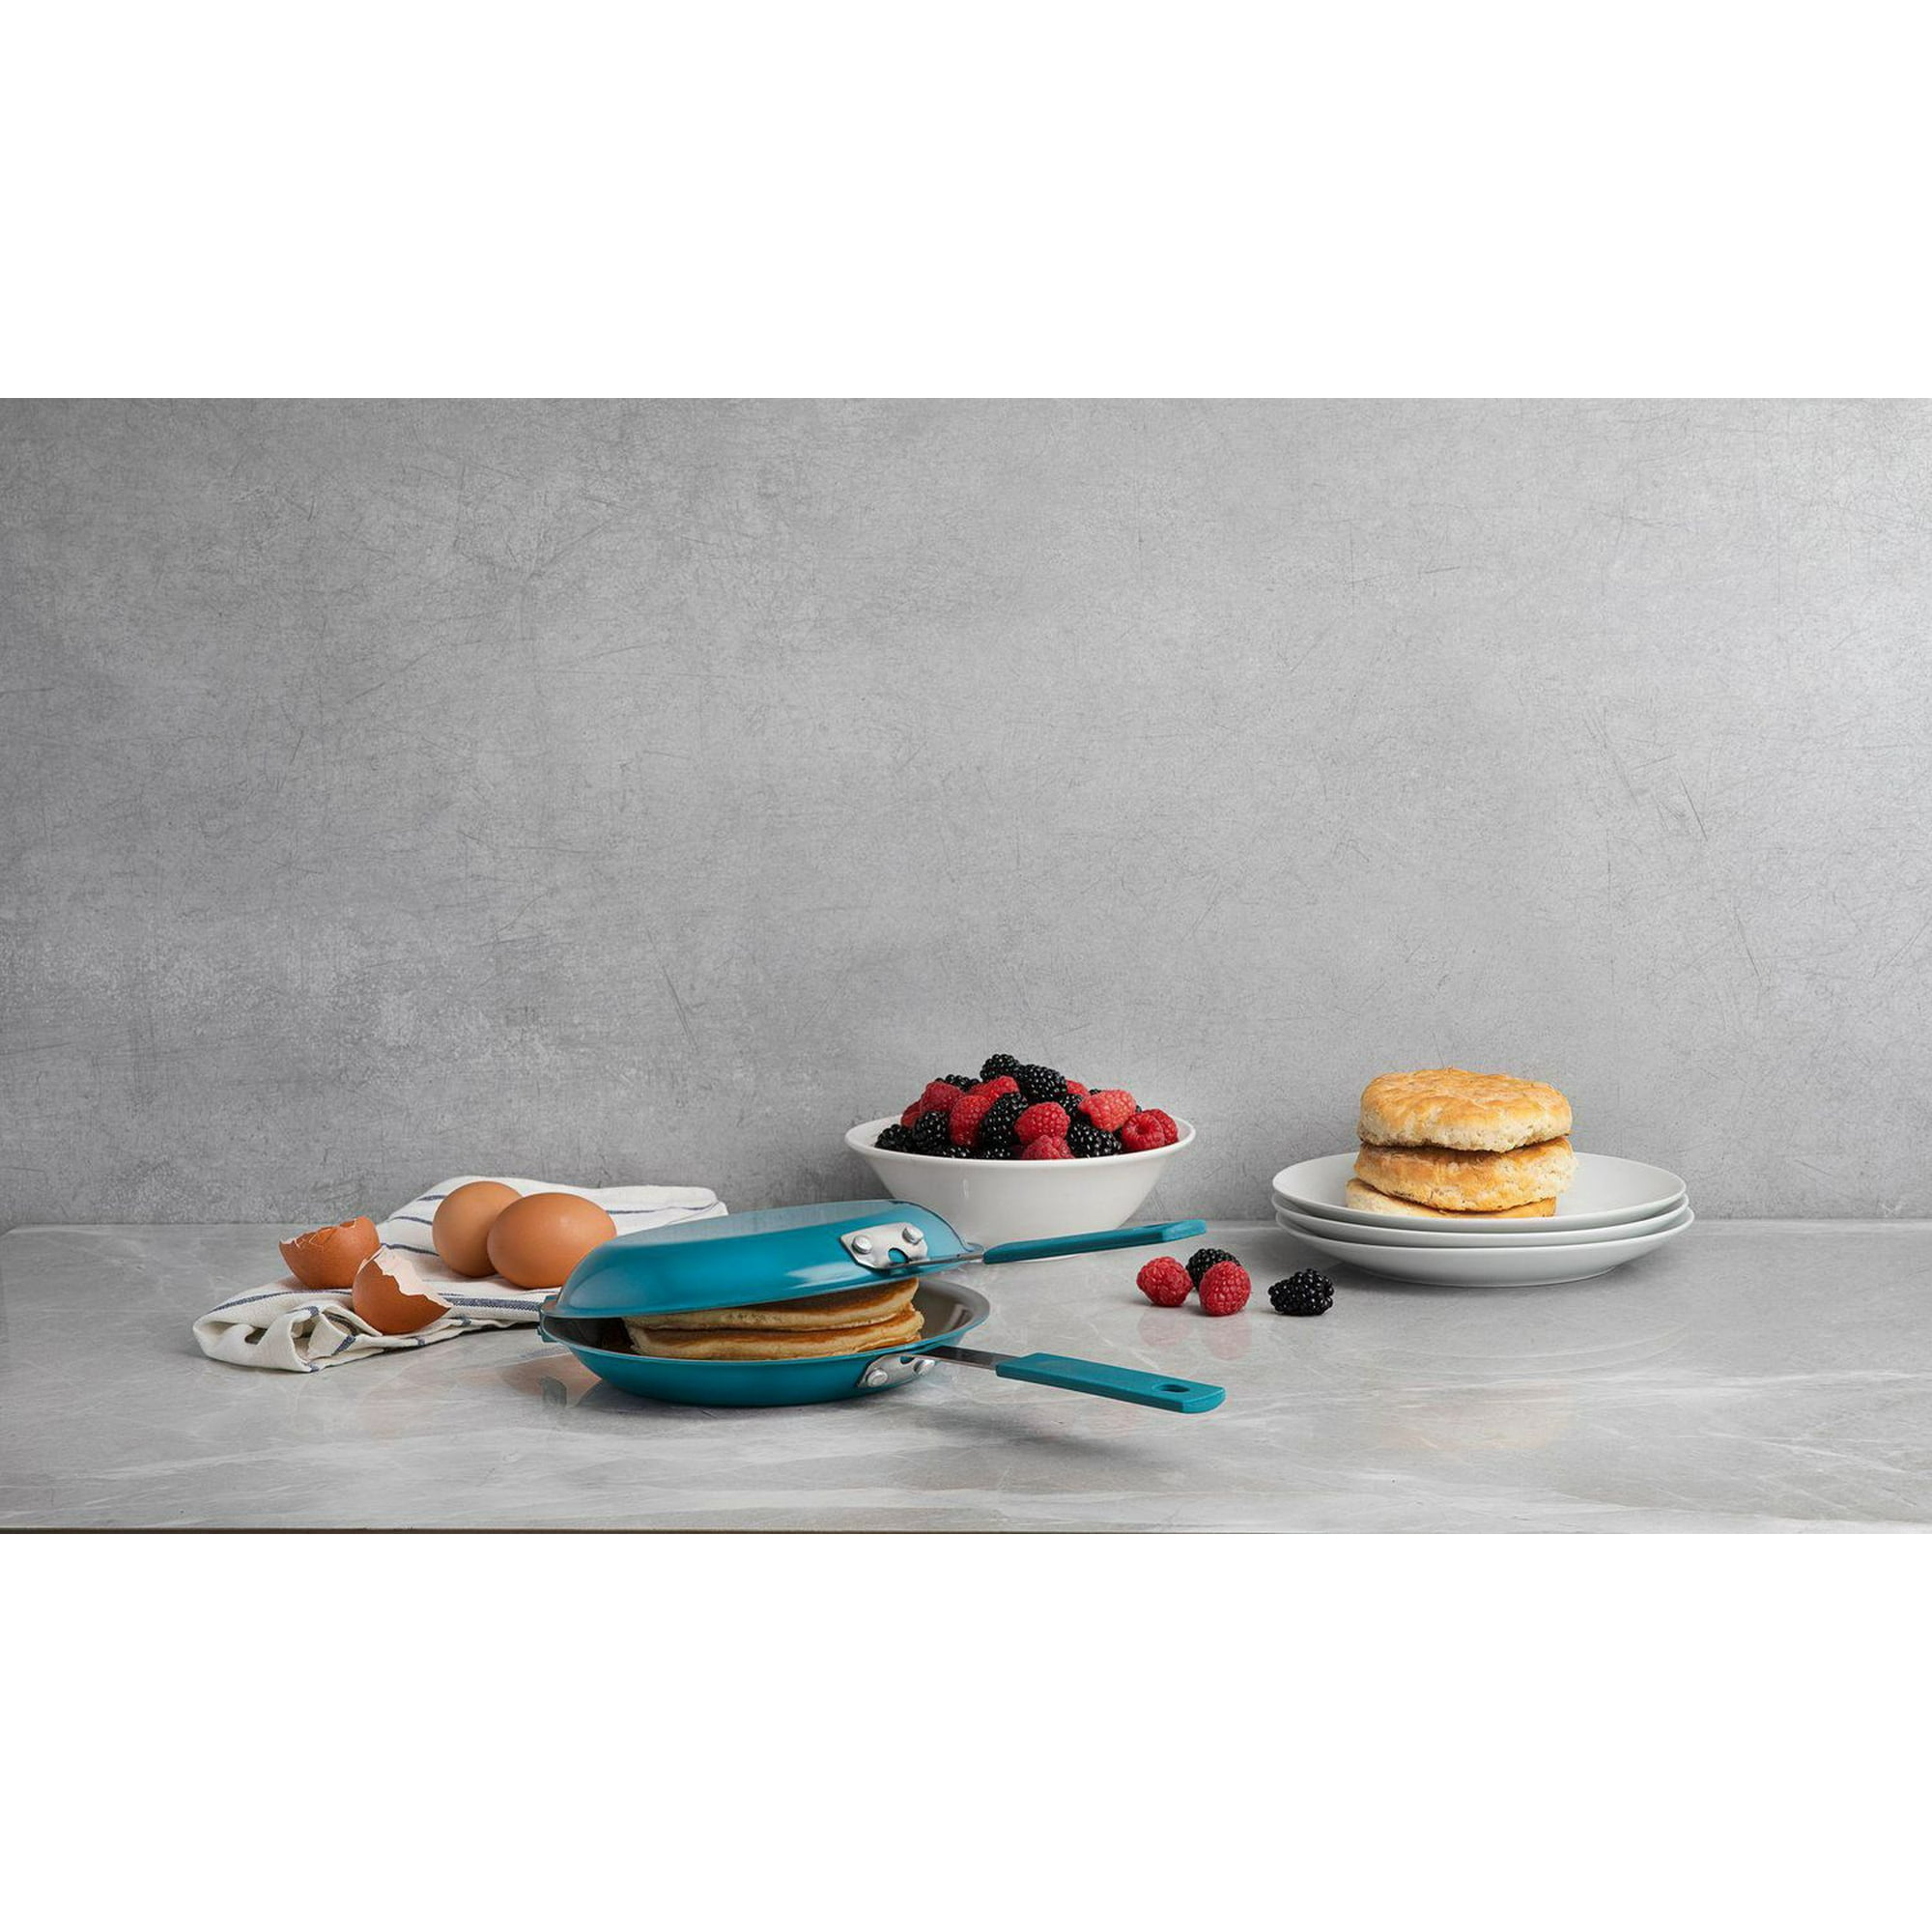 Gotham Steel Turquoise Double Pan – Nonstick Copper Easy to Flip Pan with  Rubber Grip Handles for Fluffy Pancakes, Perfect Omelets, Frittatas, French  Toast and More! Dishwasher Safe 